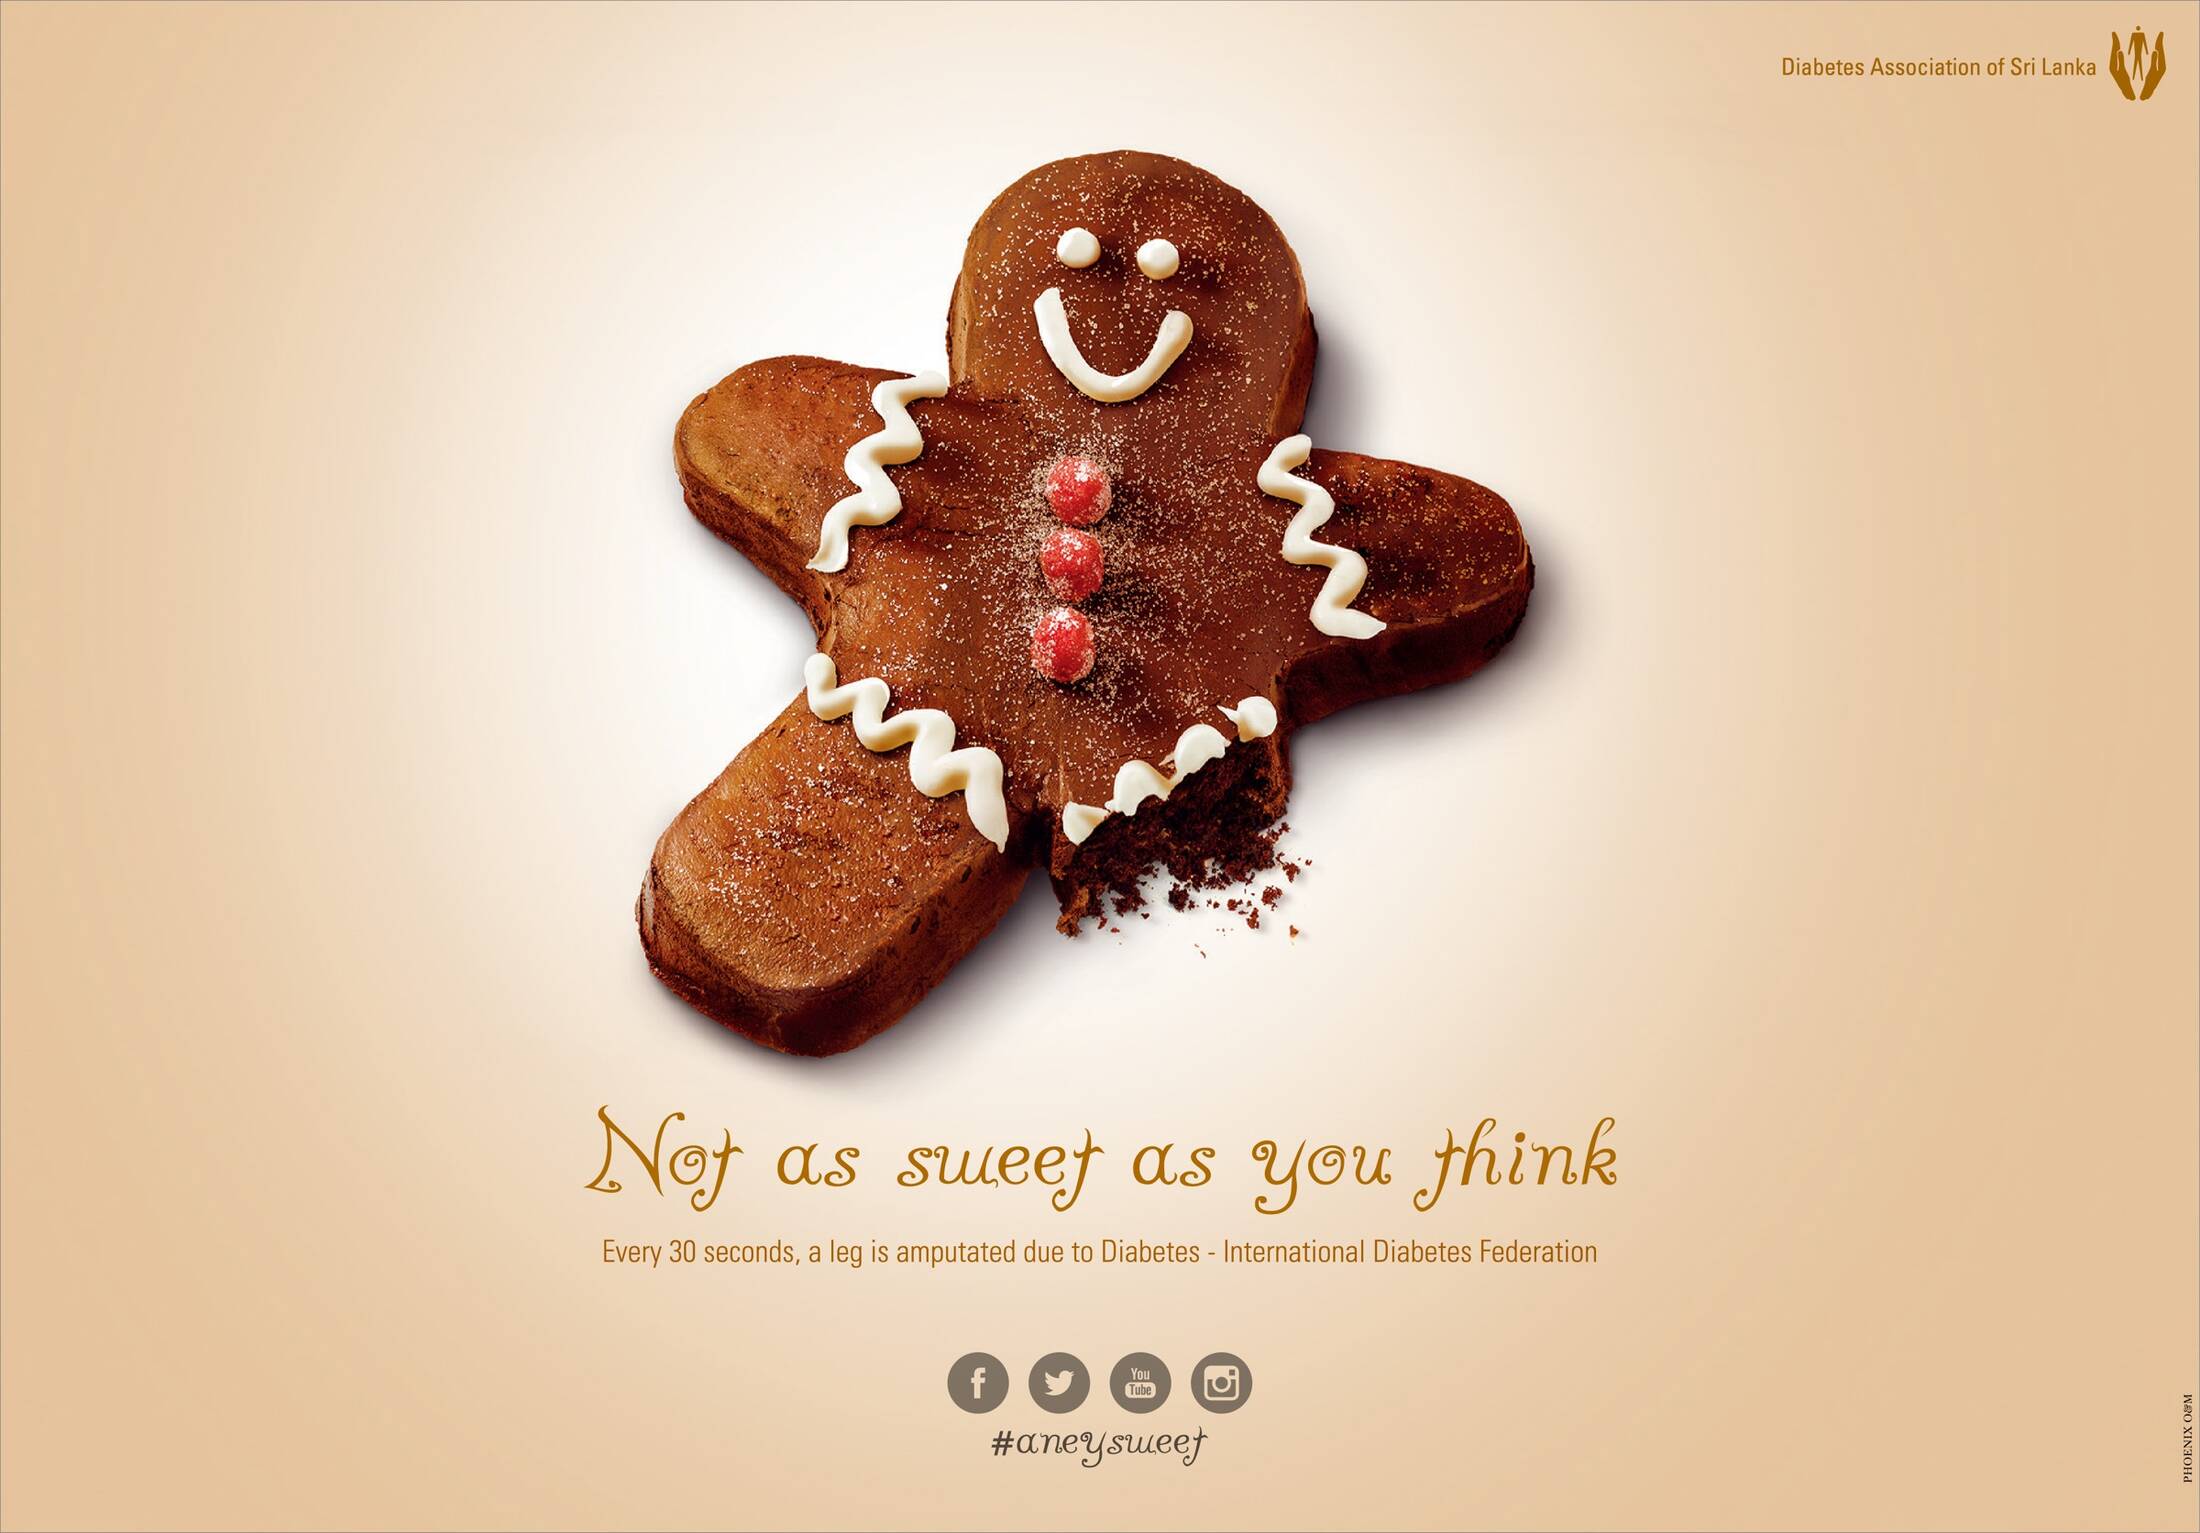 A gingerbread man cookie with one leg missing. Text underneat reads 'Not as sweet as you think. Every 30 seconds, a leg is amputated due to diabetes - International Diabetes Federation'. The ad is sponsored by the Diabetes Association of Sri Lanka